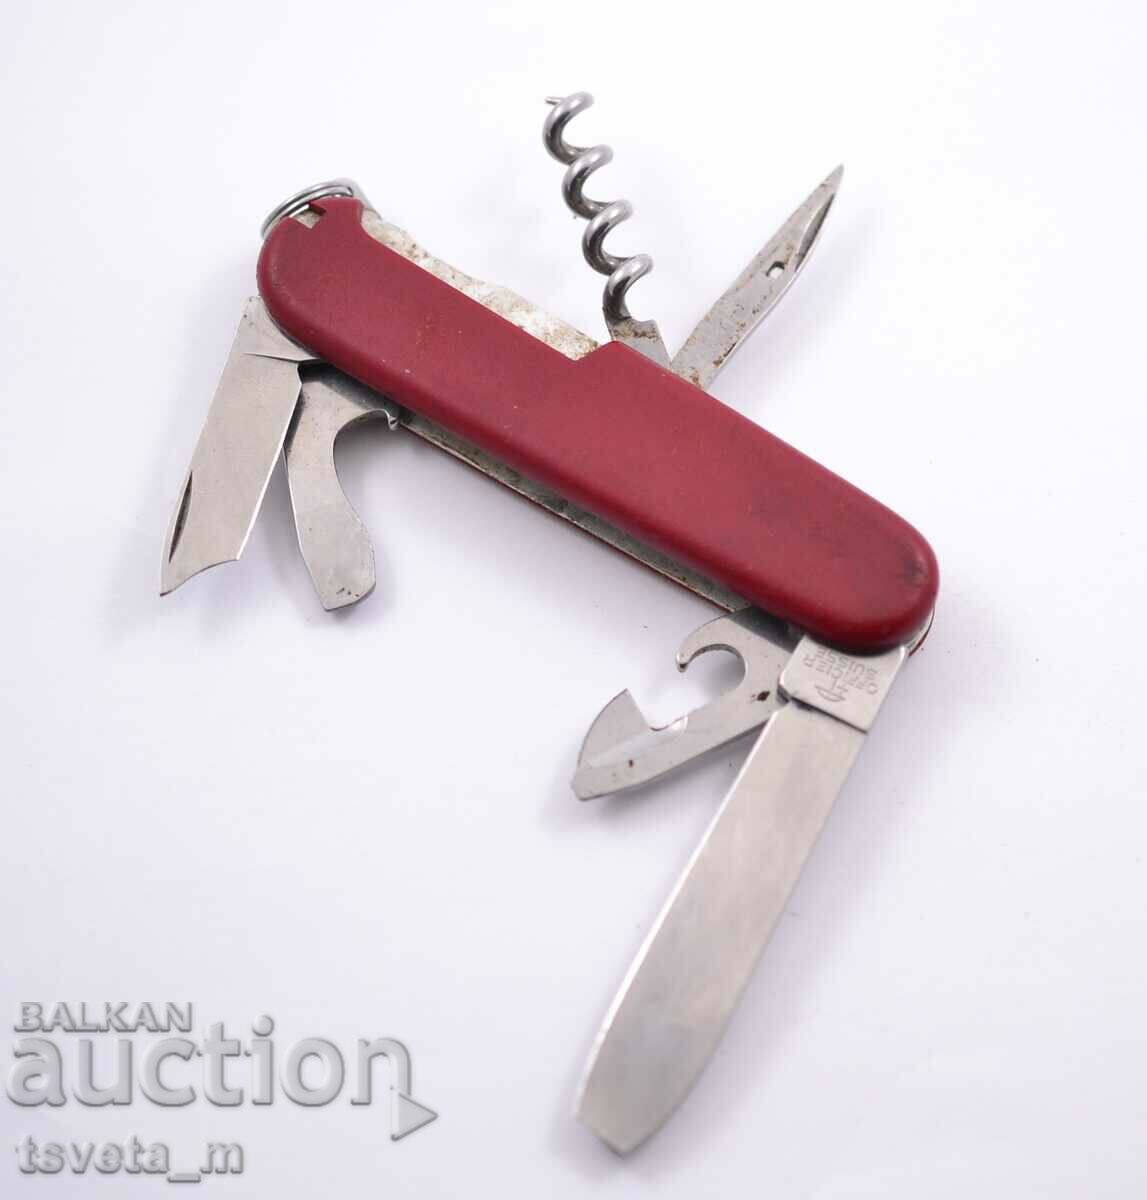 Victorinox 6-tool pocket knife, for repair or parts